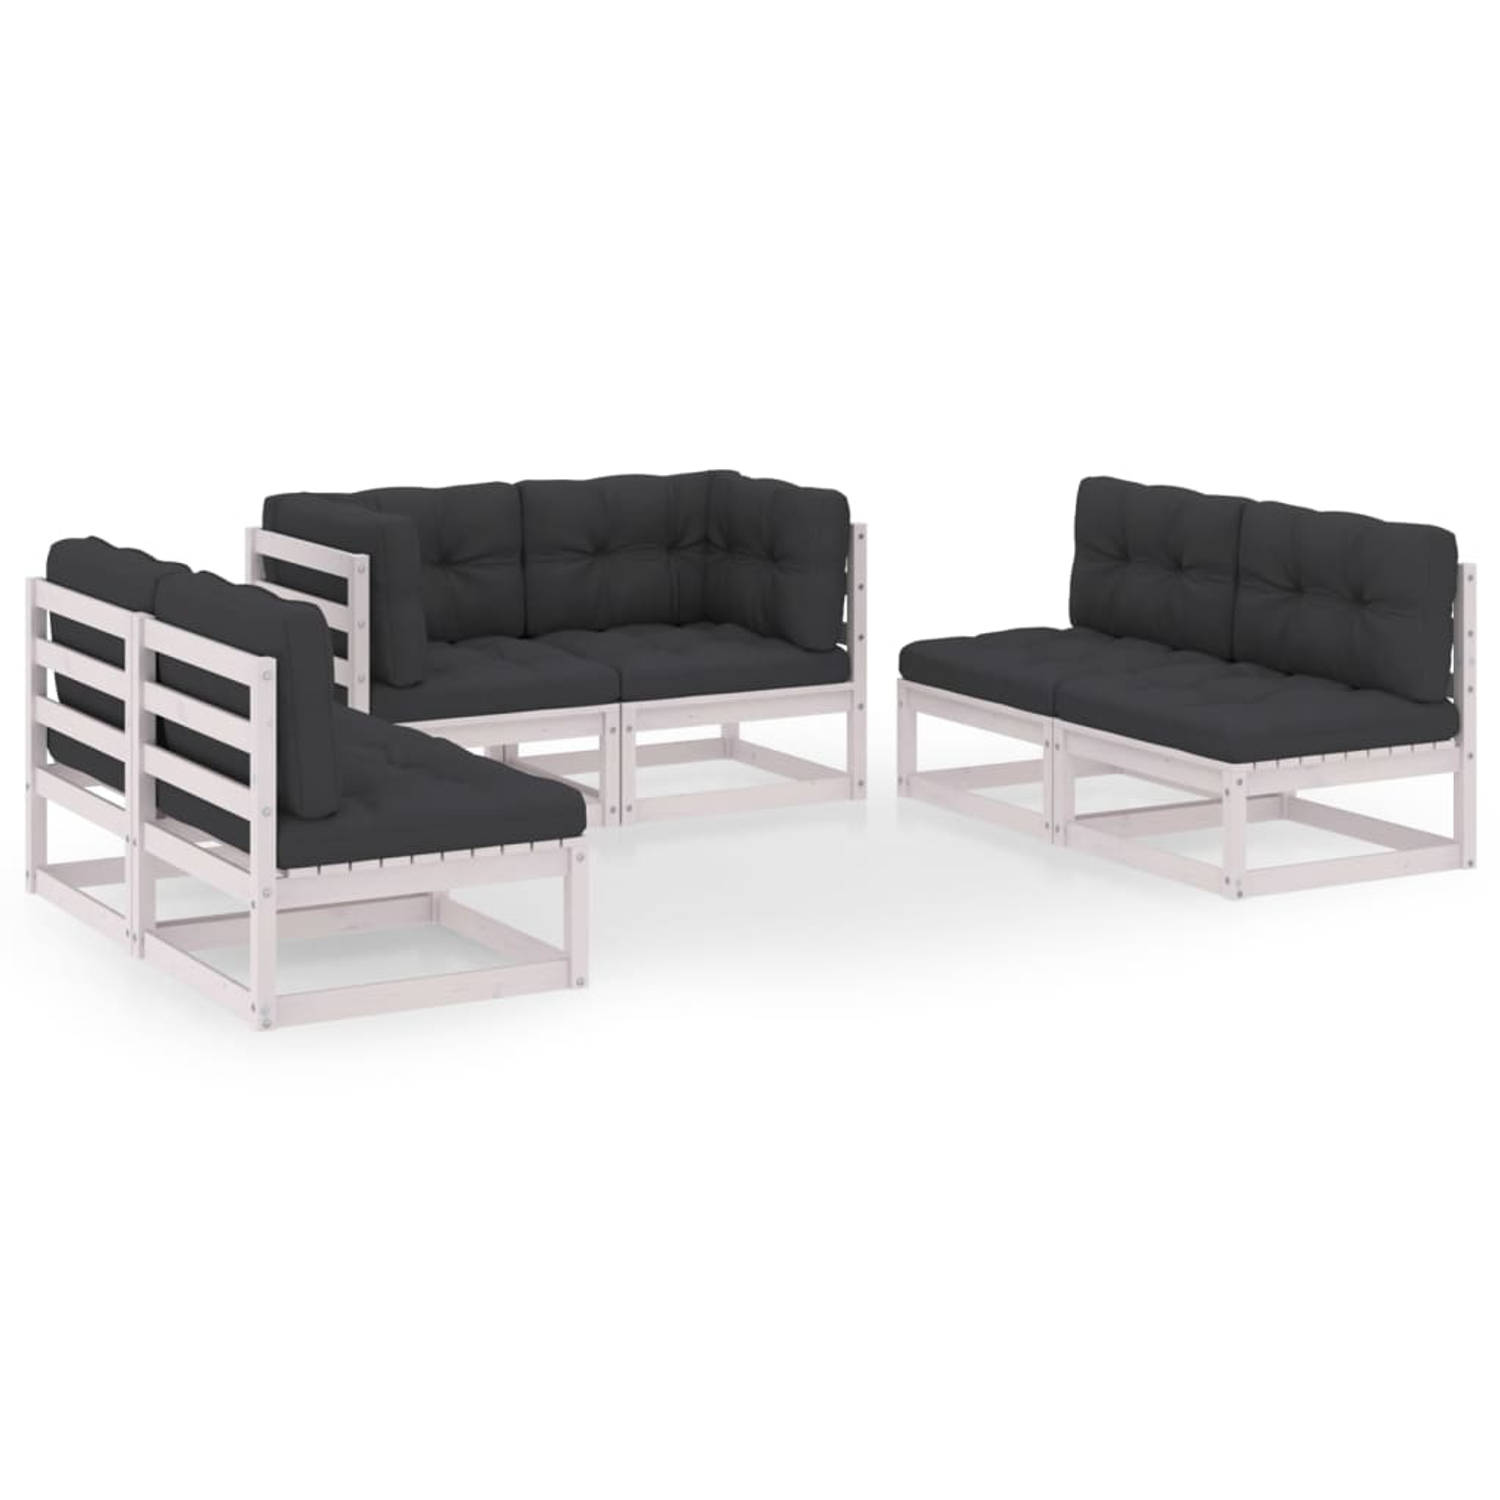 The Living Store Loungeset - Grenenhout - Wit - 70 x 70 x 67 cm - Inclusief kussens